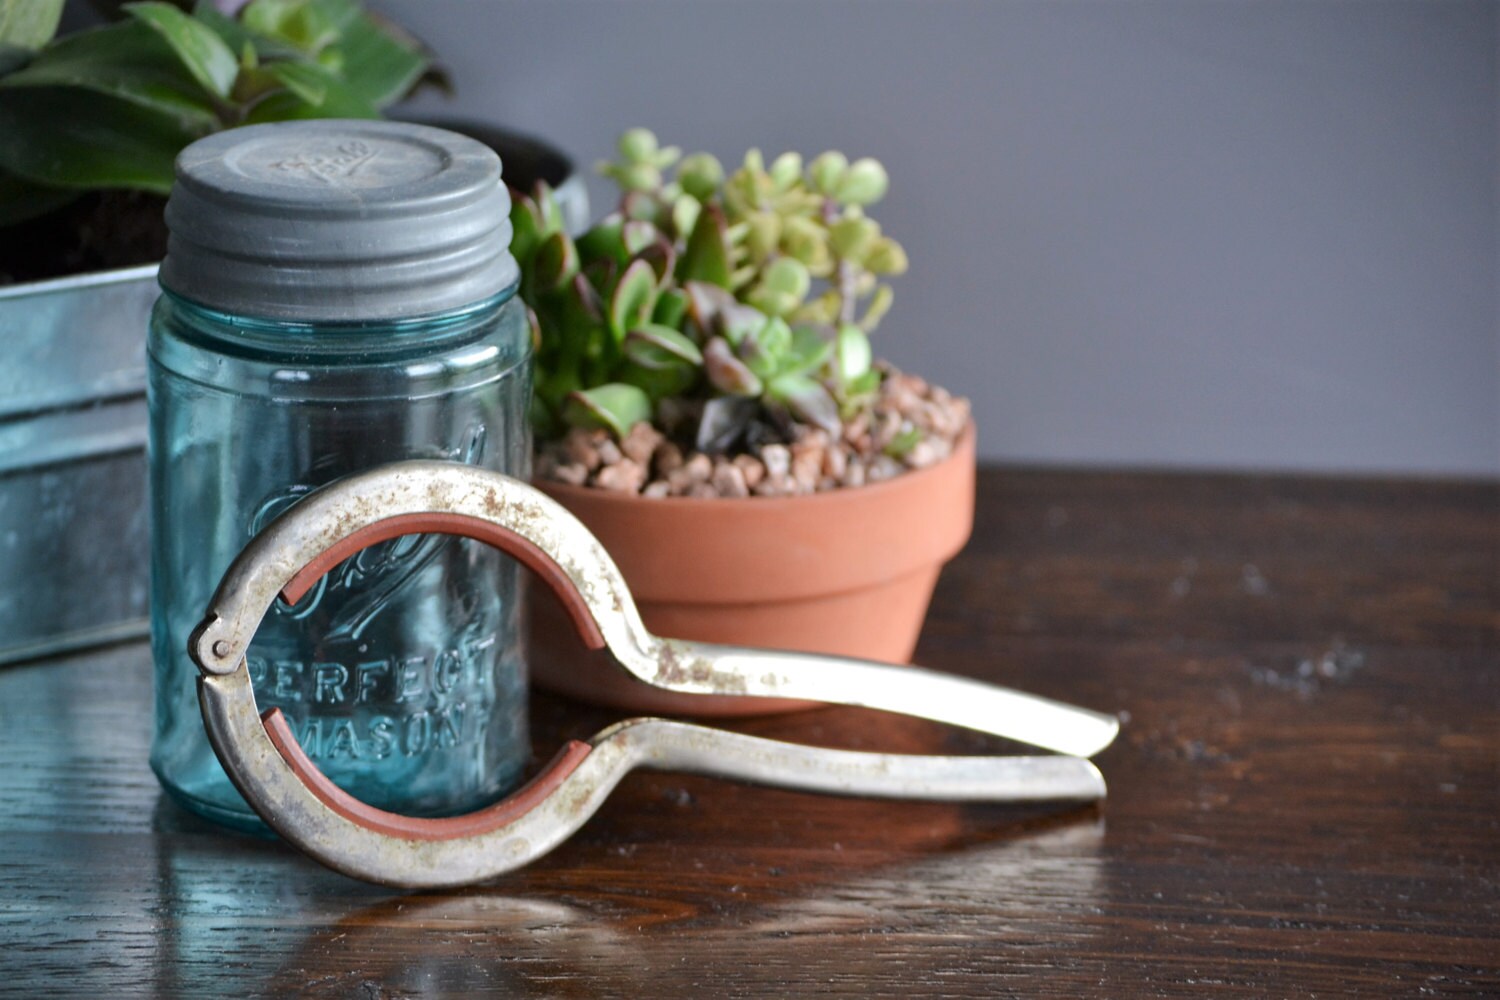 Personalized Rubber Jar Opener Design Your Own Housewarming 